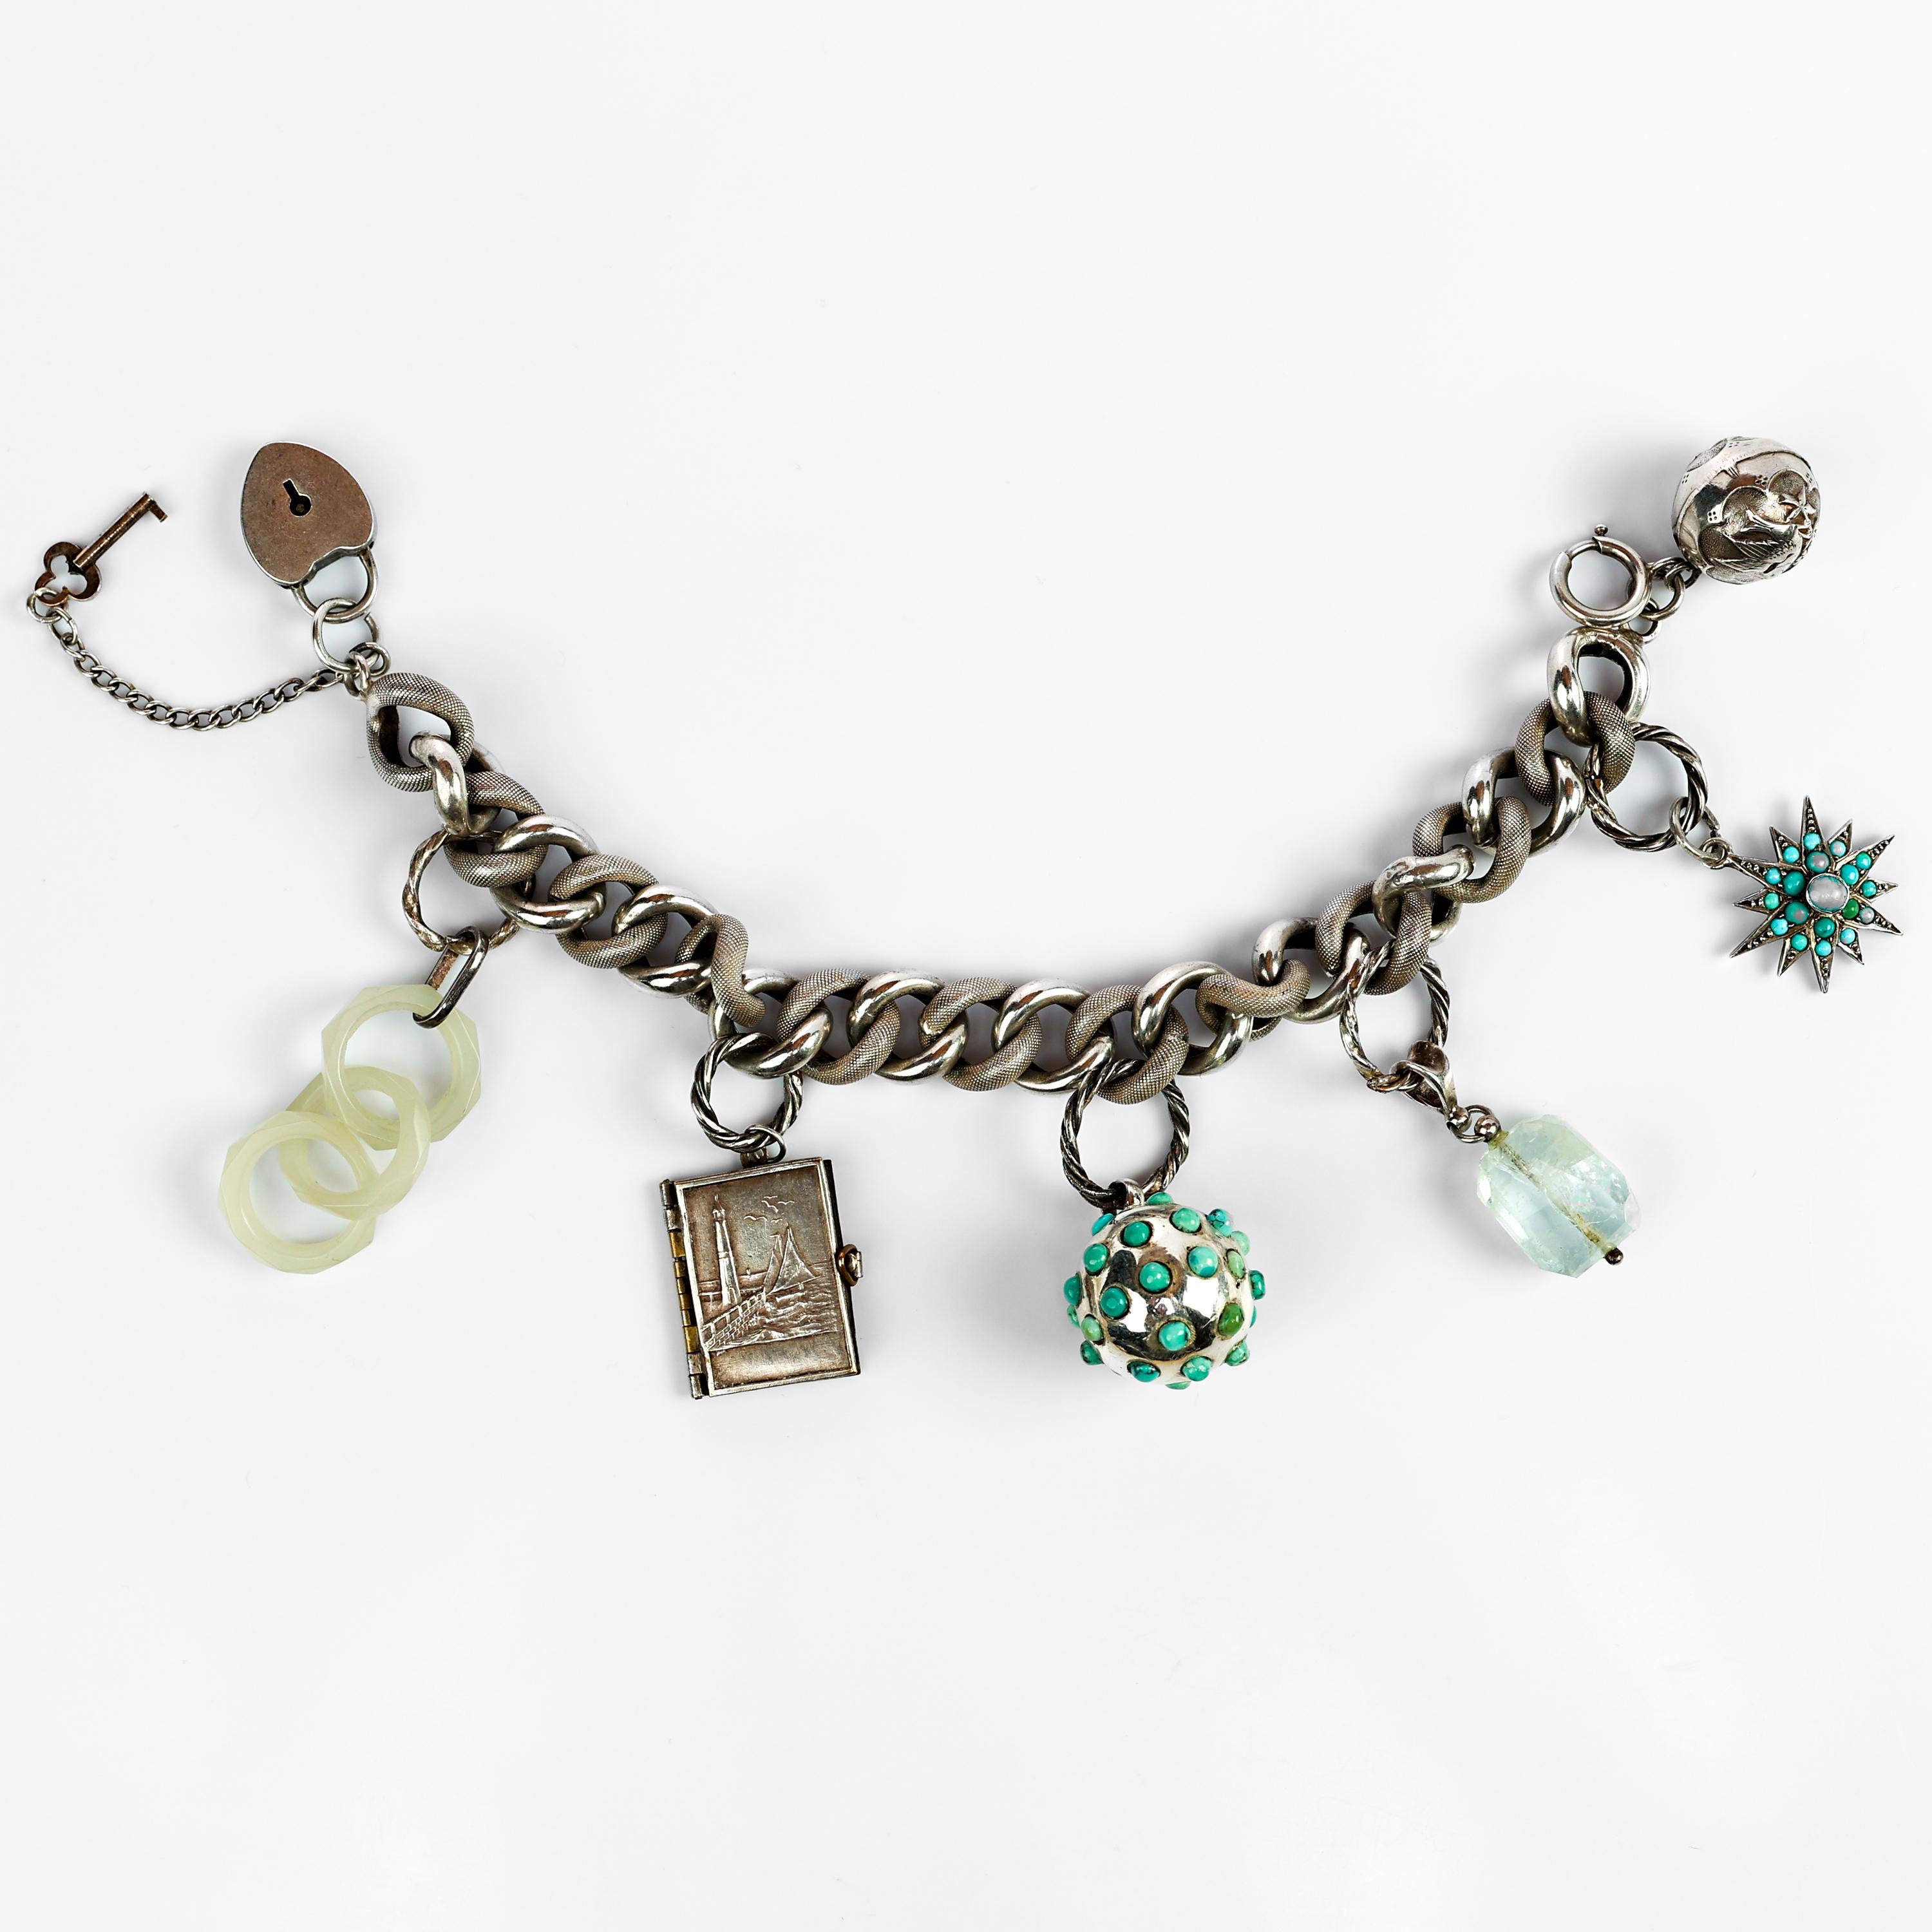 Dating to the late Victorian-era (Circa 1880), this French silver charm bracelet is unusual for both the high-quality of its charms and their uniqueness as well. Charm bracelets are fascinating. In an era when women's voices were so frequently